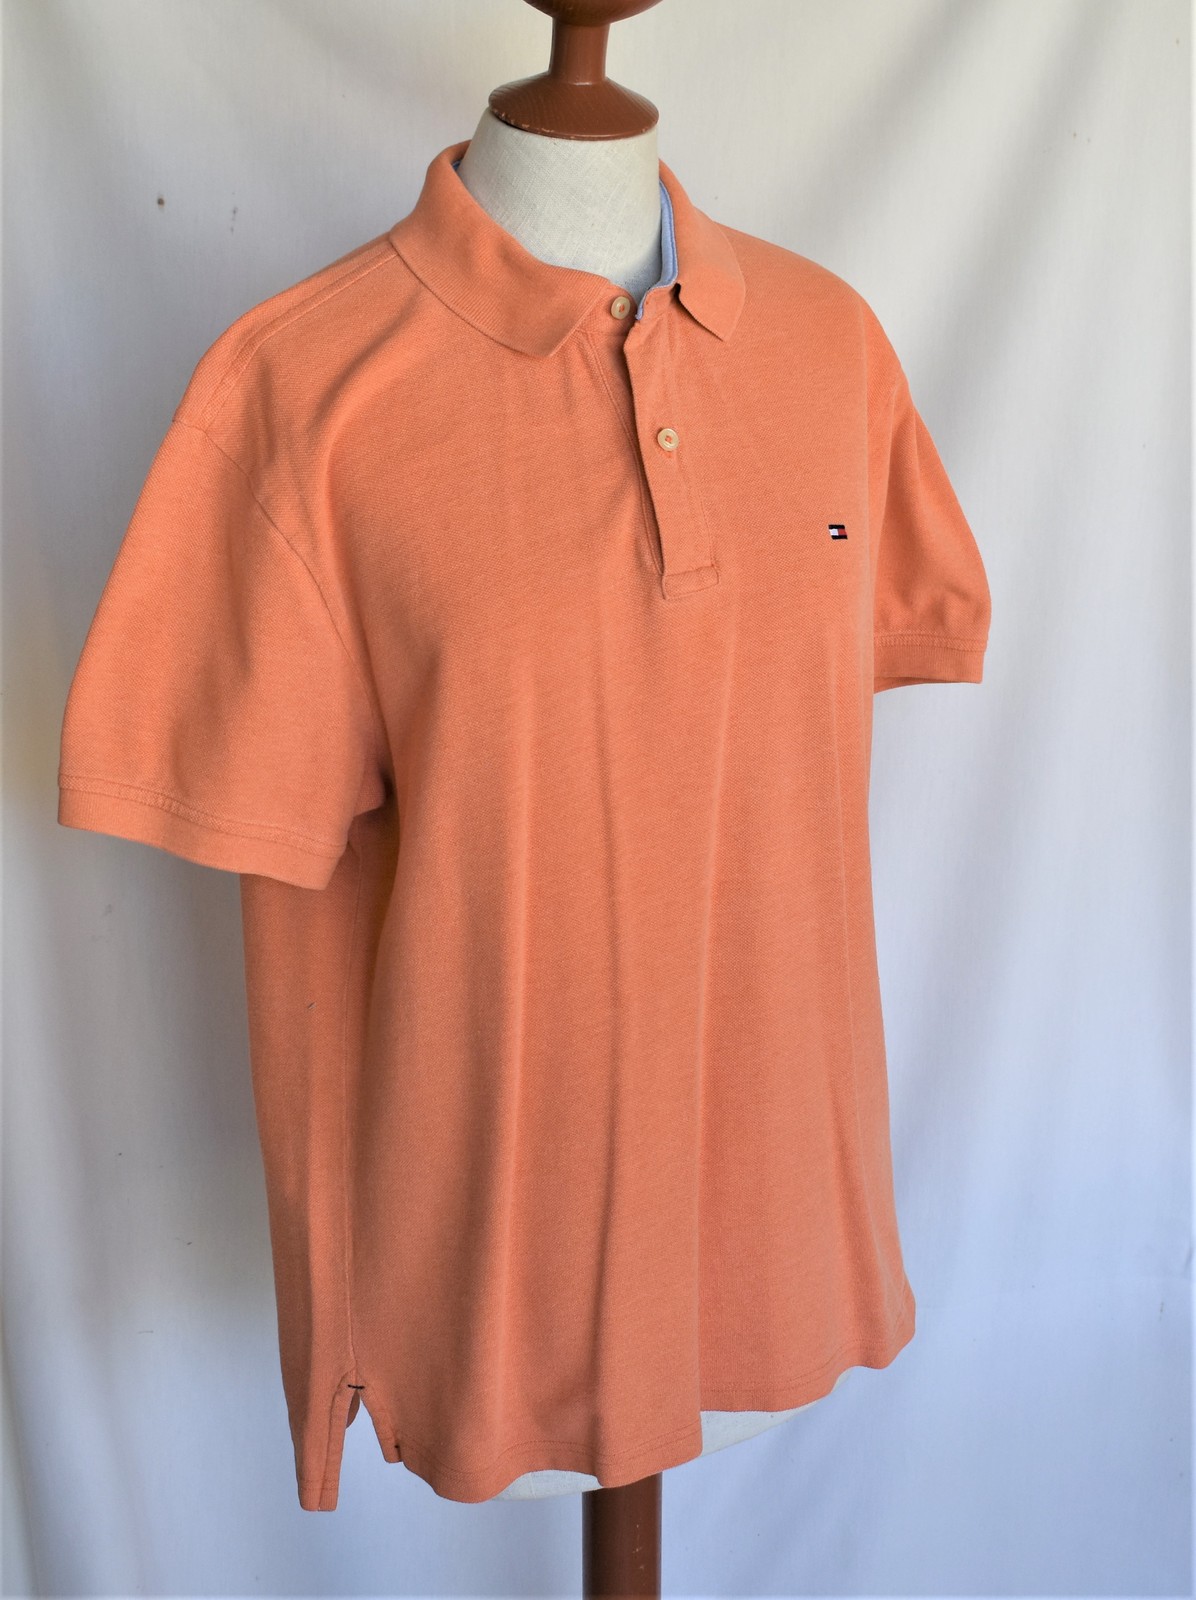 Tommy Hilfiger Golf Shirt Faded Orange M and similar items